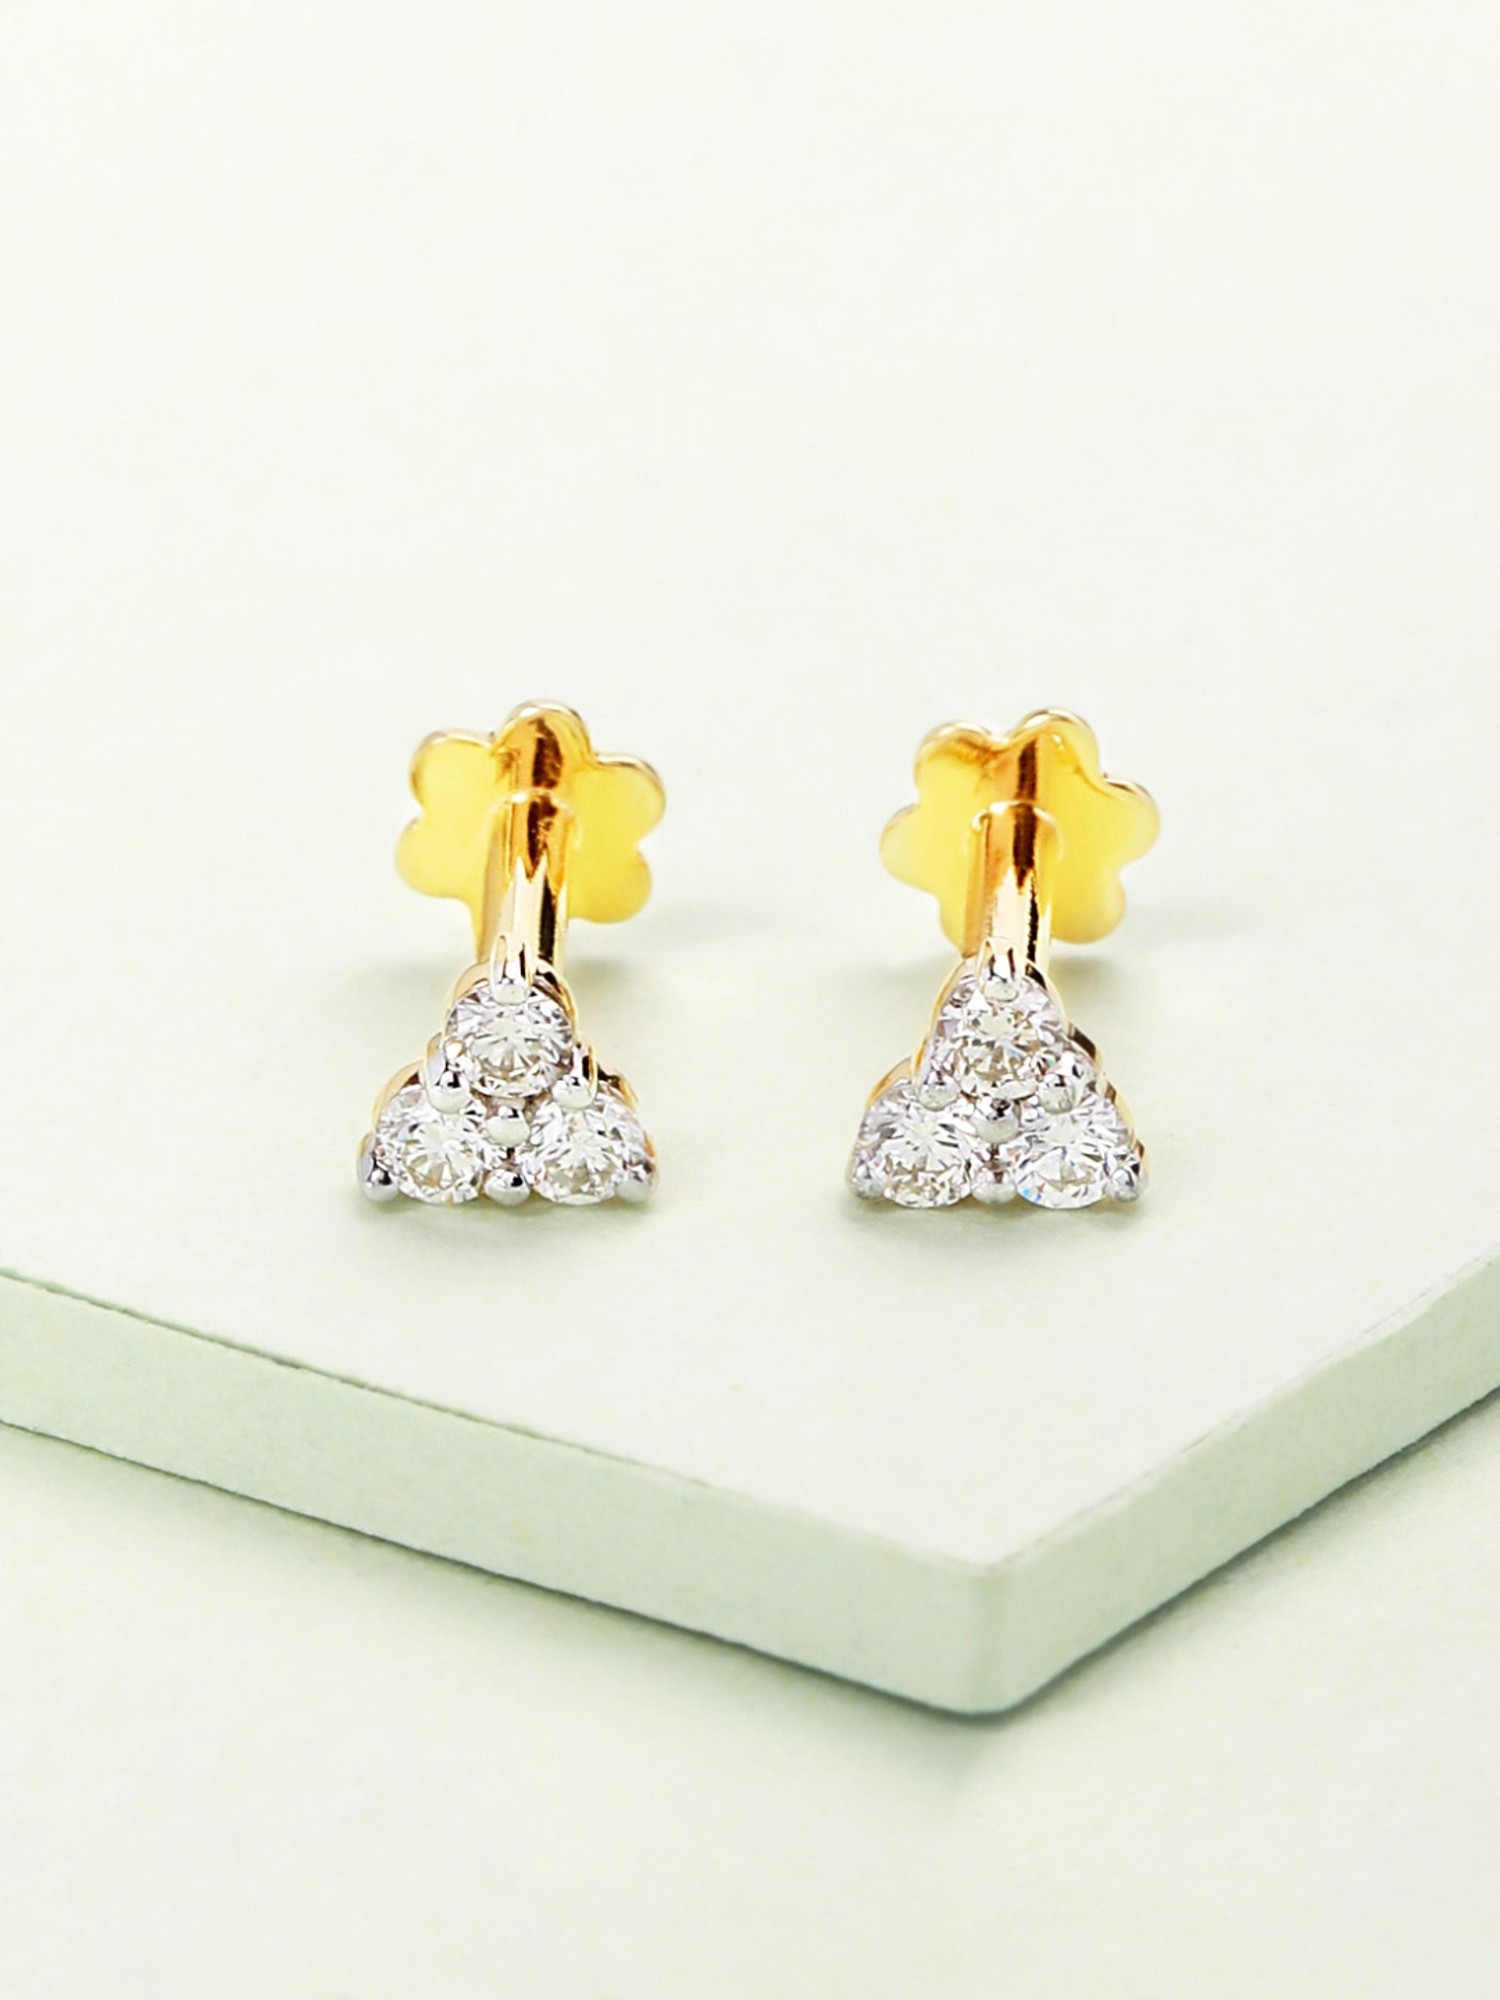 Buy Candere by Kalyan Jewellers CANDERE A KALYAN JEWELLERS COMPANY  DiamondStudded 14KT Gold Stud Earrings  06 gm at Redfynd